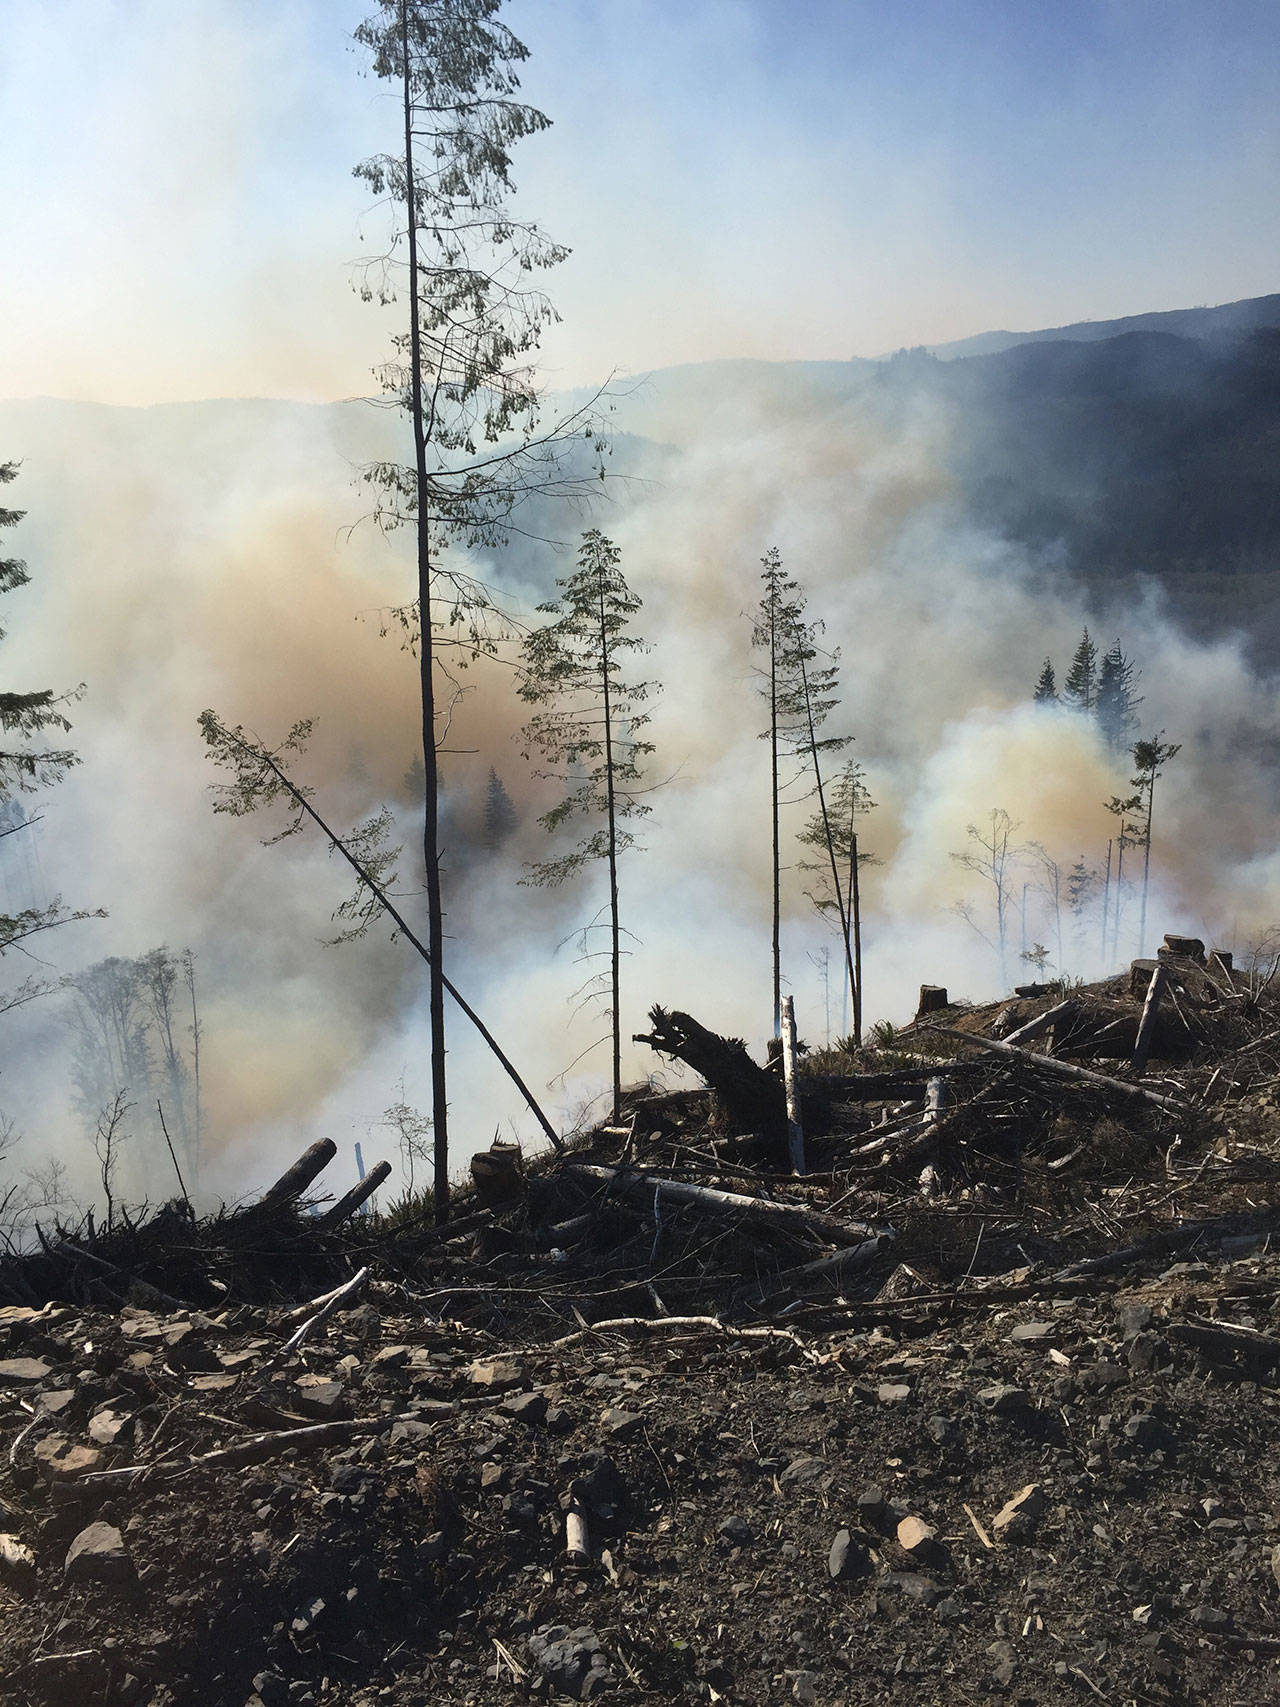 A slash burn near state Highway 113 and U.S. Highway 101 got out of control Sunday when winds kicked up, burning at least 5 acres. (Bill Paul/Clallam Fire District No. 1)